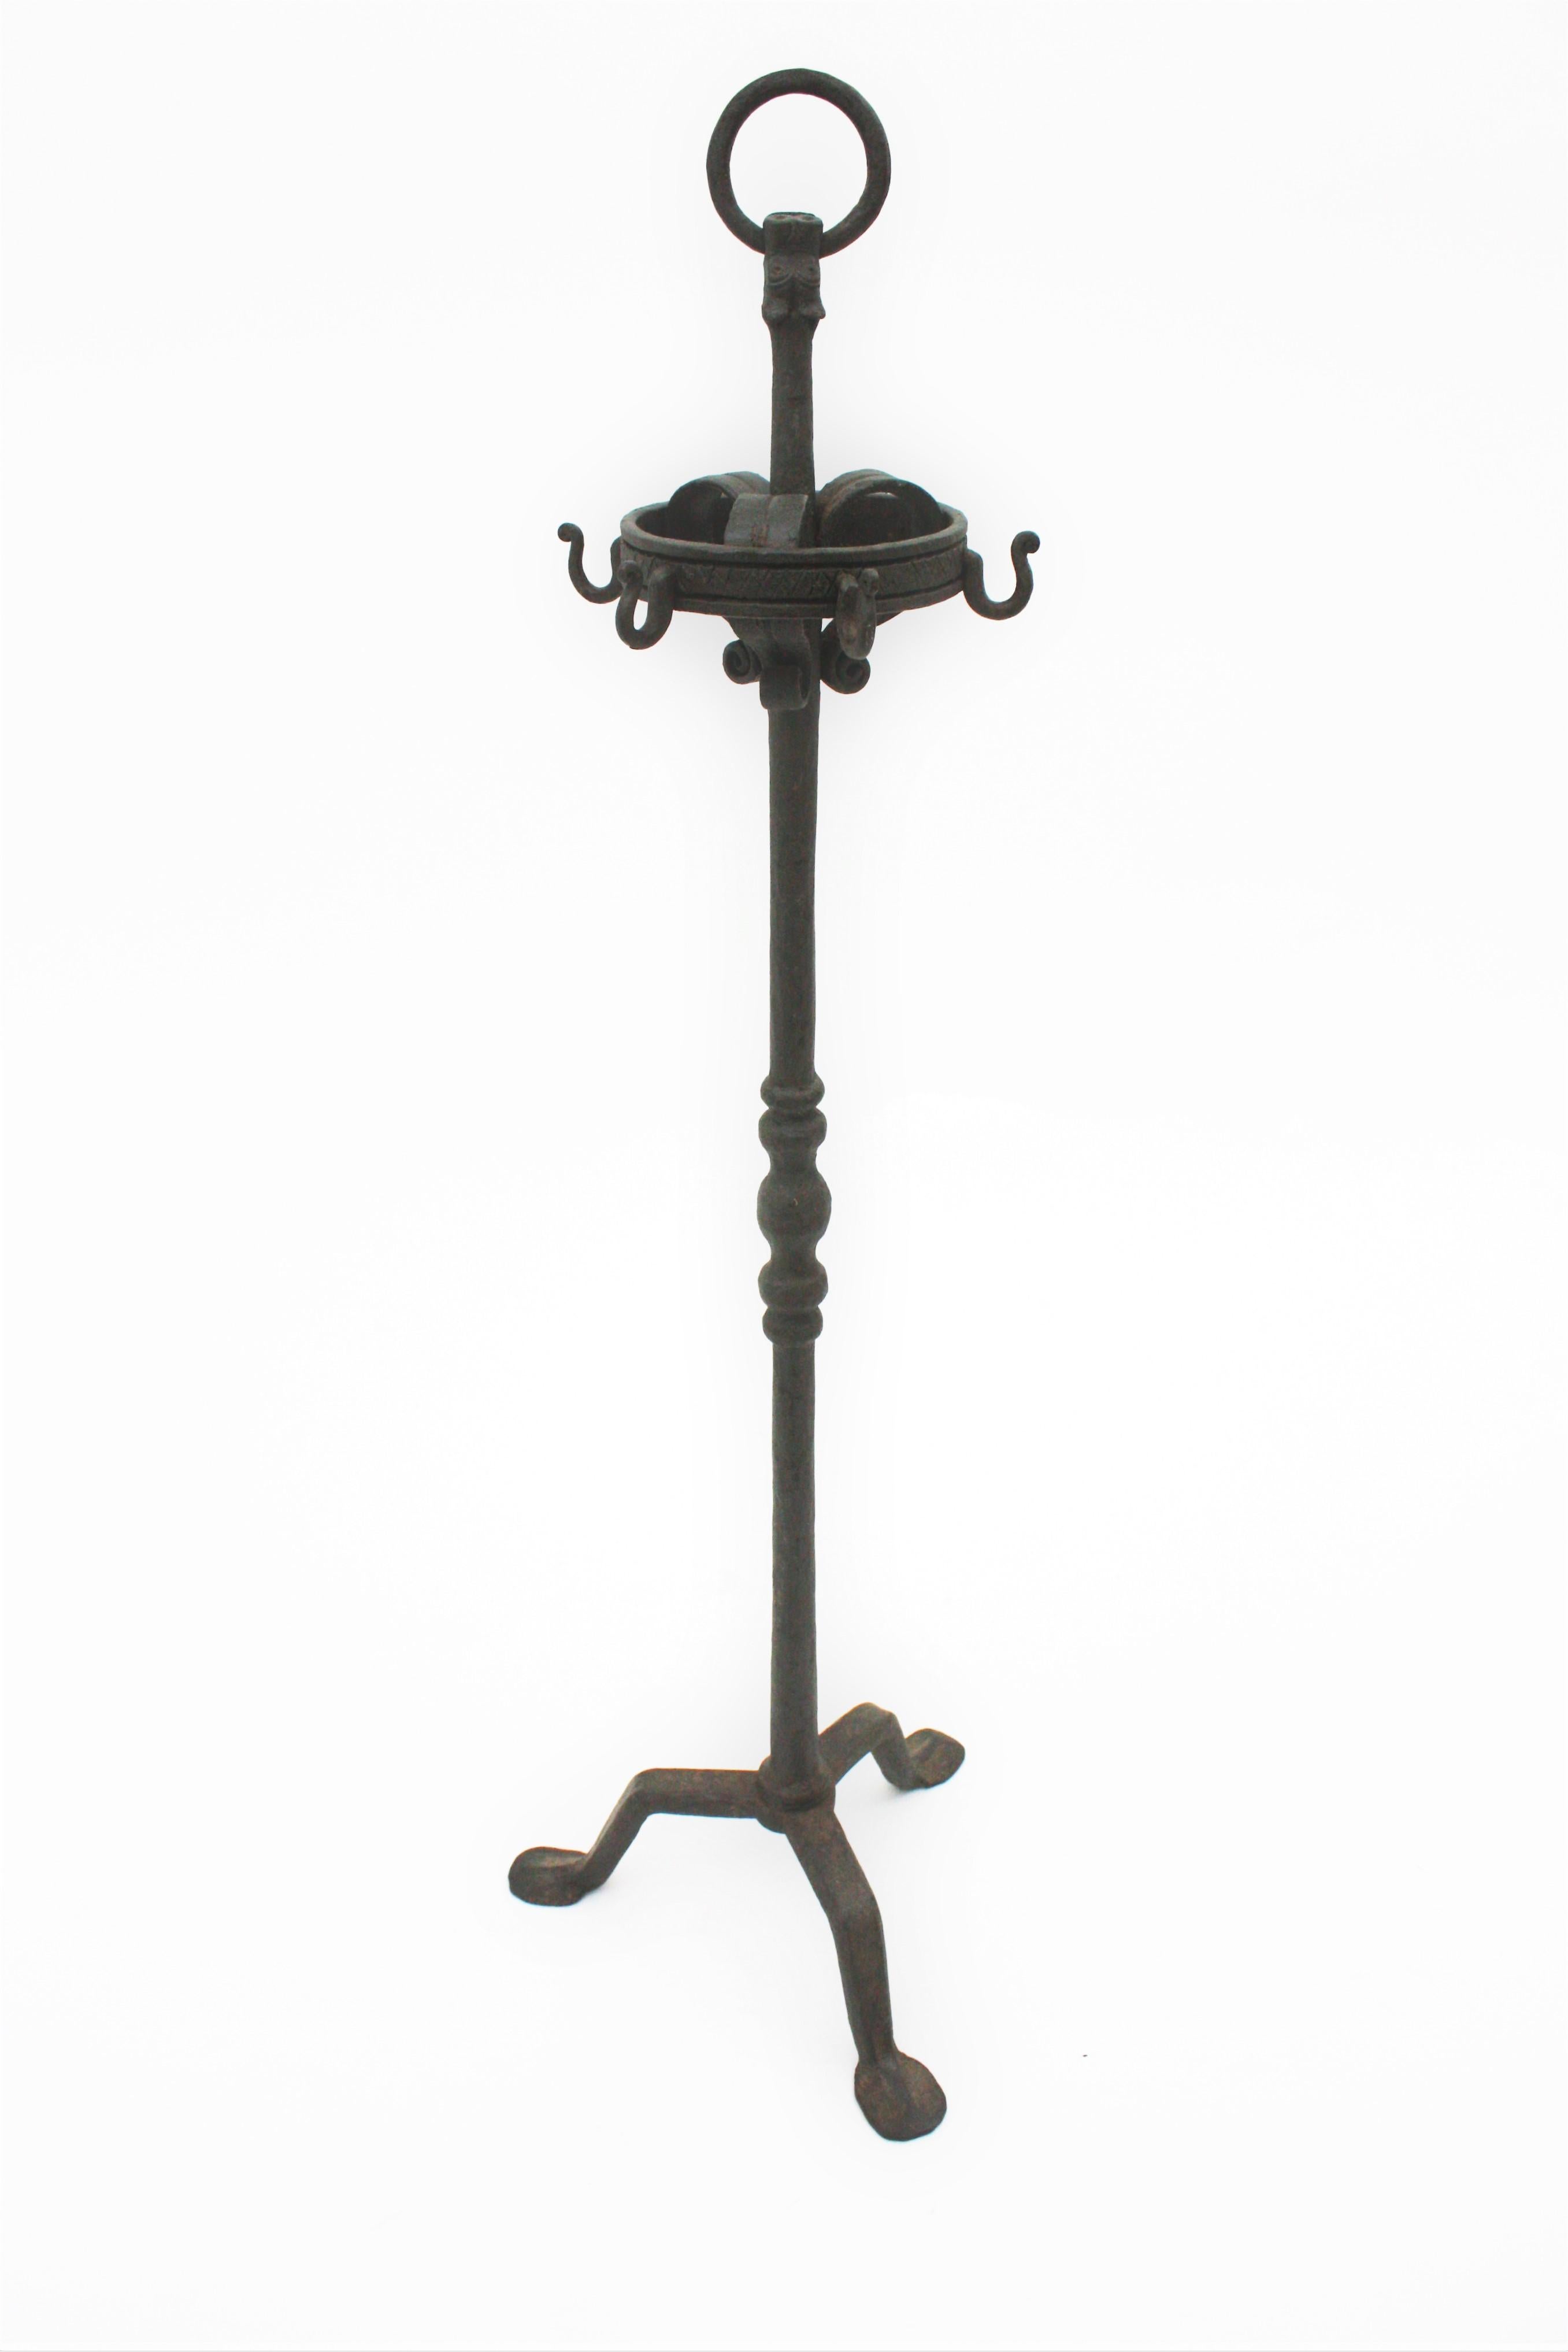 Spanish Gothic Revival Fireplace Tools Stand in Wrought Iron with Dragon Motif 6